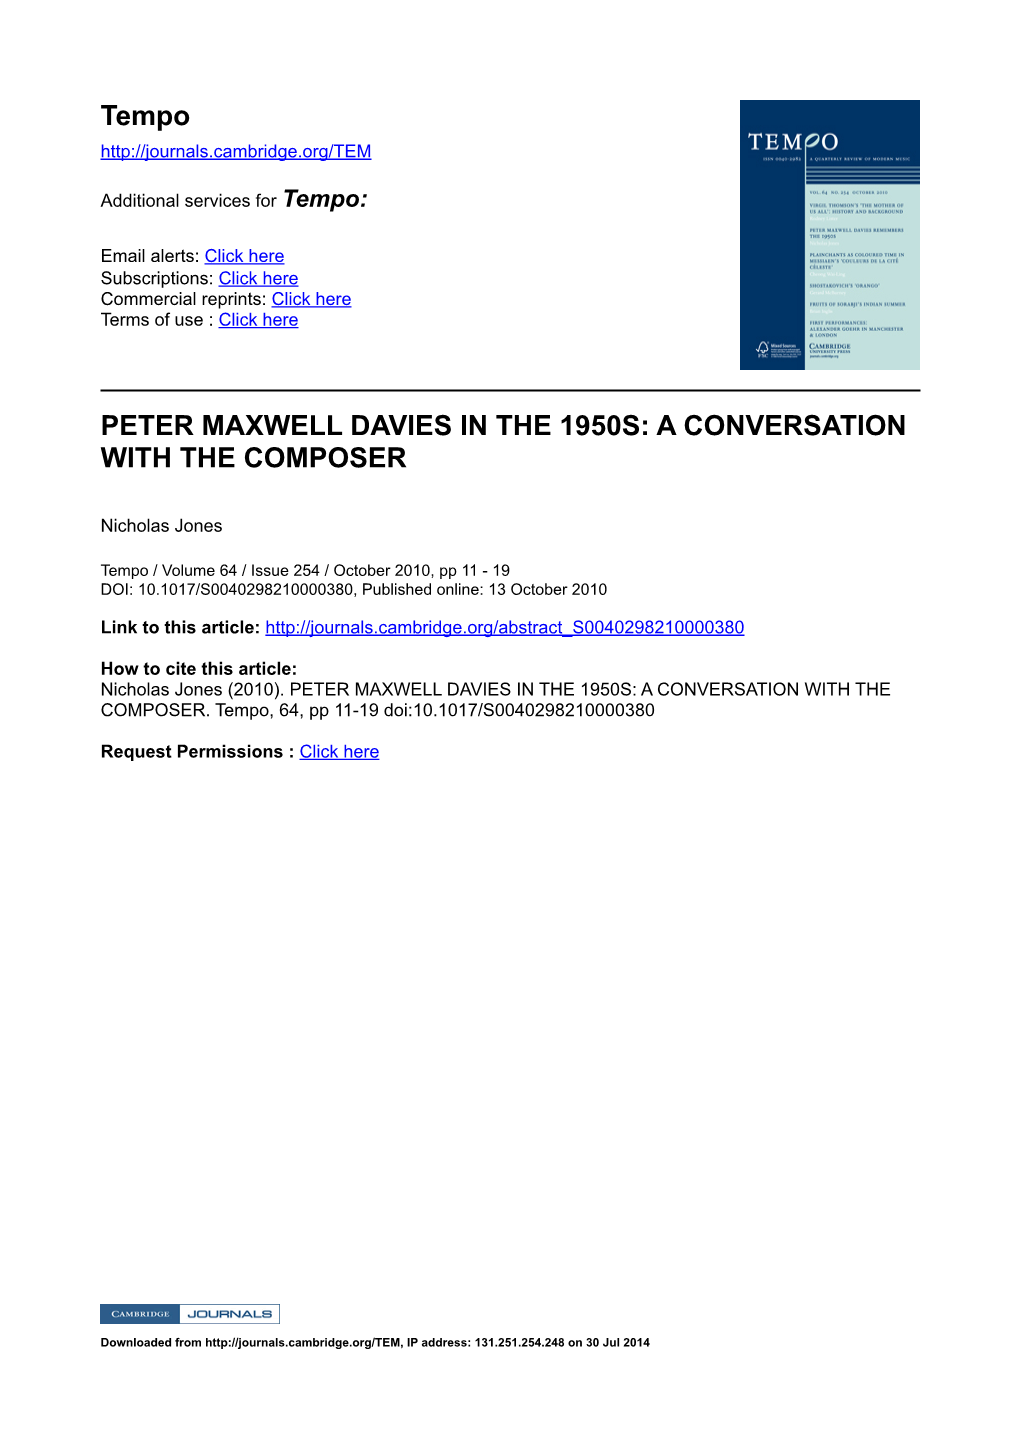 Peter Maxwell Davies in the 1950S: a Conversation with the Composer